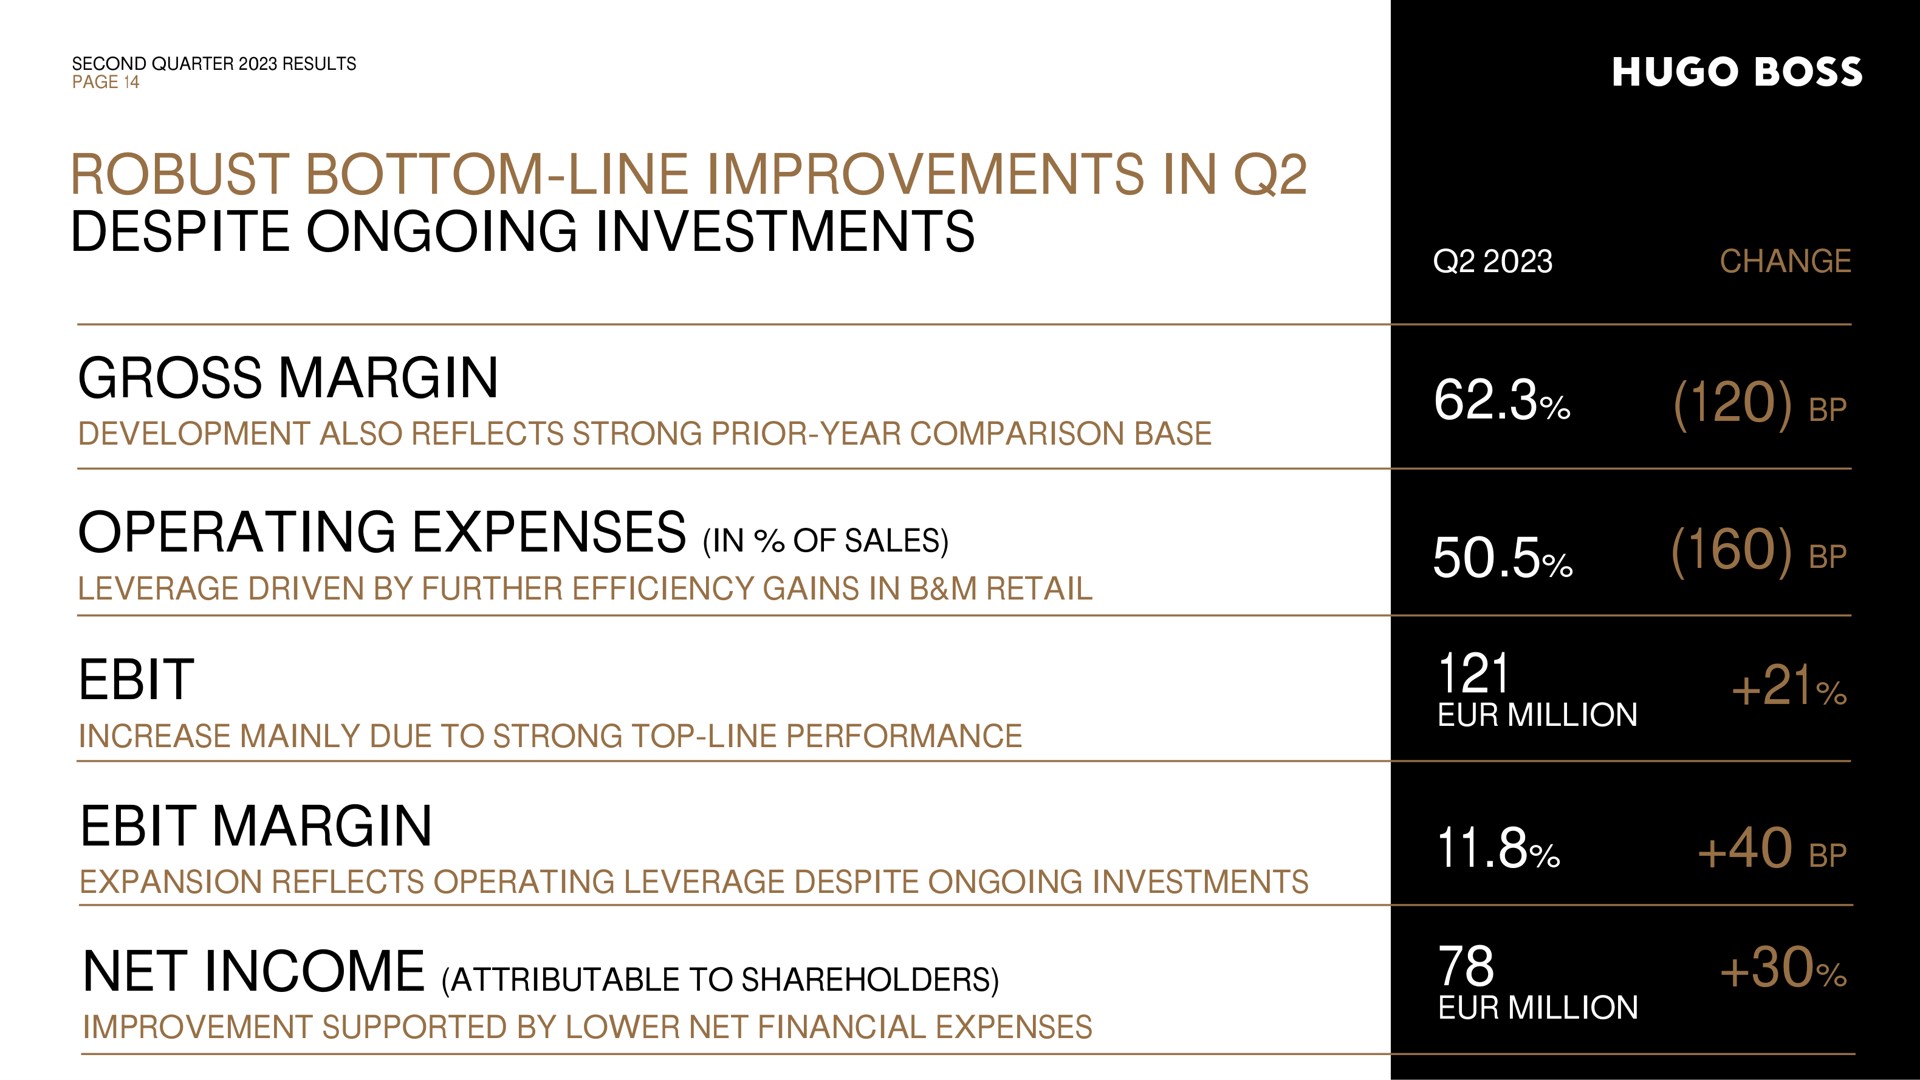 second quarter results page robust bottom line improvements in despite ongoing investments change gross margin development also reflects strong prior year comparison base operating expenses in of sales leverage driven by further efficiency gains in retail increase mainly due to strong top line performance margin expansion reflects operating leverage despite ongoing investments net income attributable to shareholders improvement supported by lower net financial expenses million million boss sates a | Hugo Boss